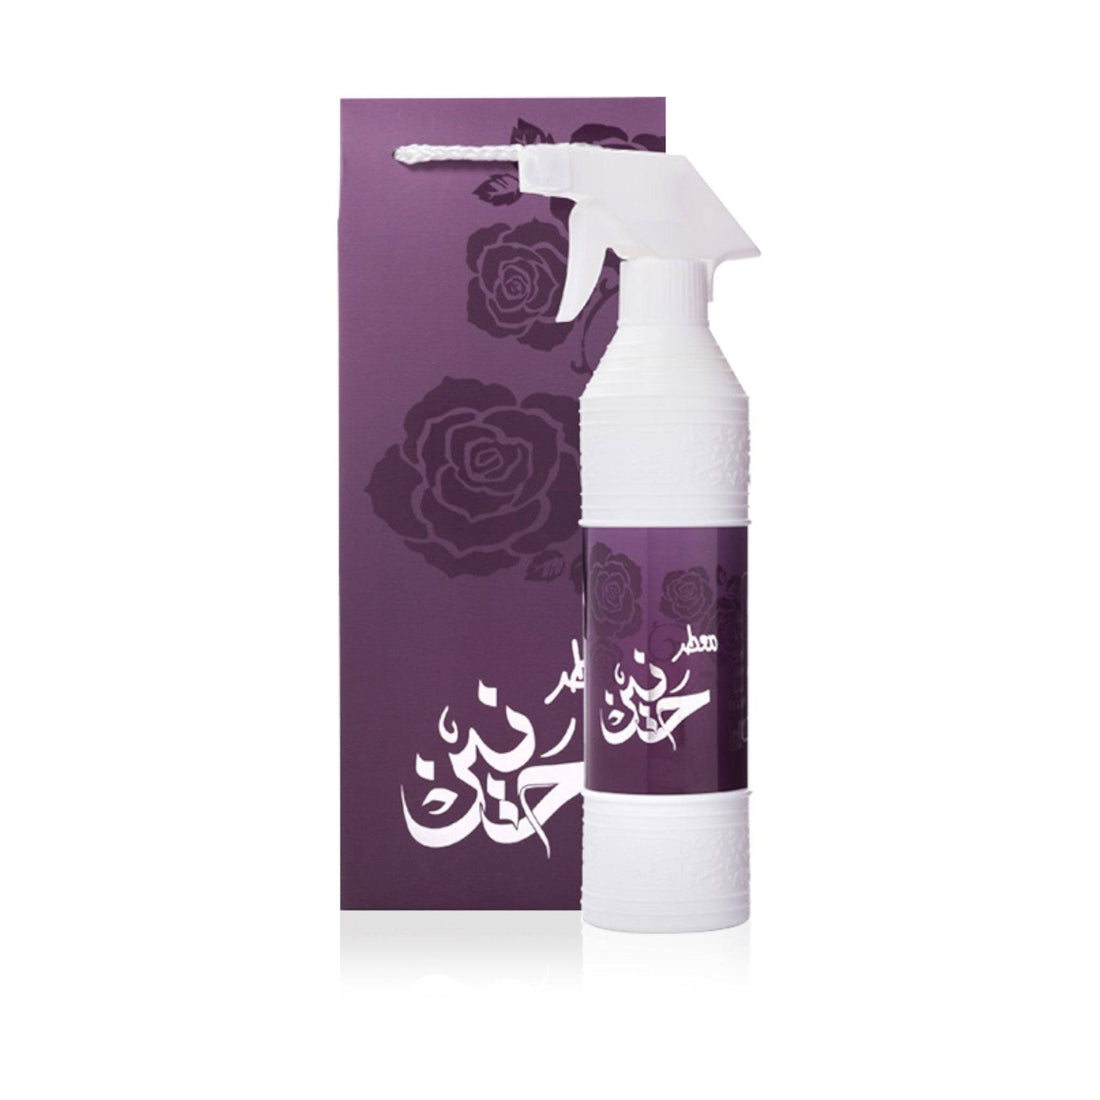 500ml bottle of Haneen Air Freshener by Oud Lover, infused with Taif rose extract for a refreshing and long-lasting scent.